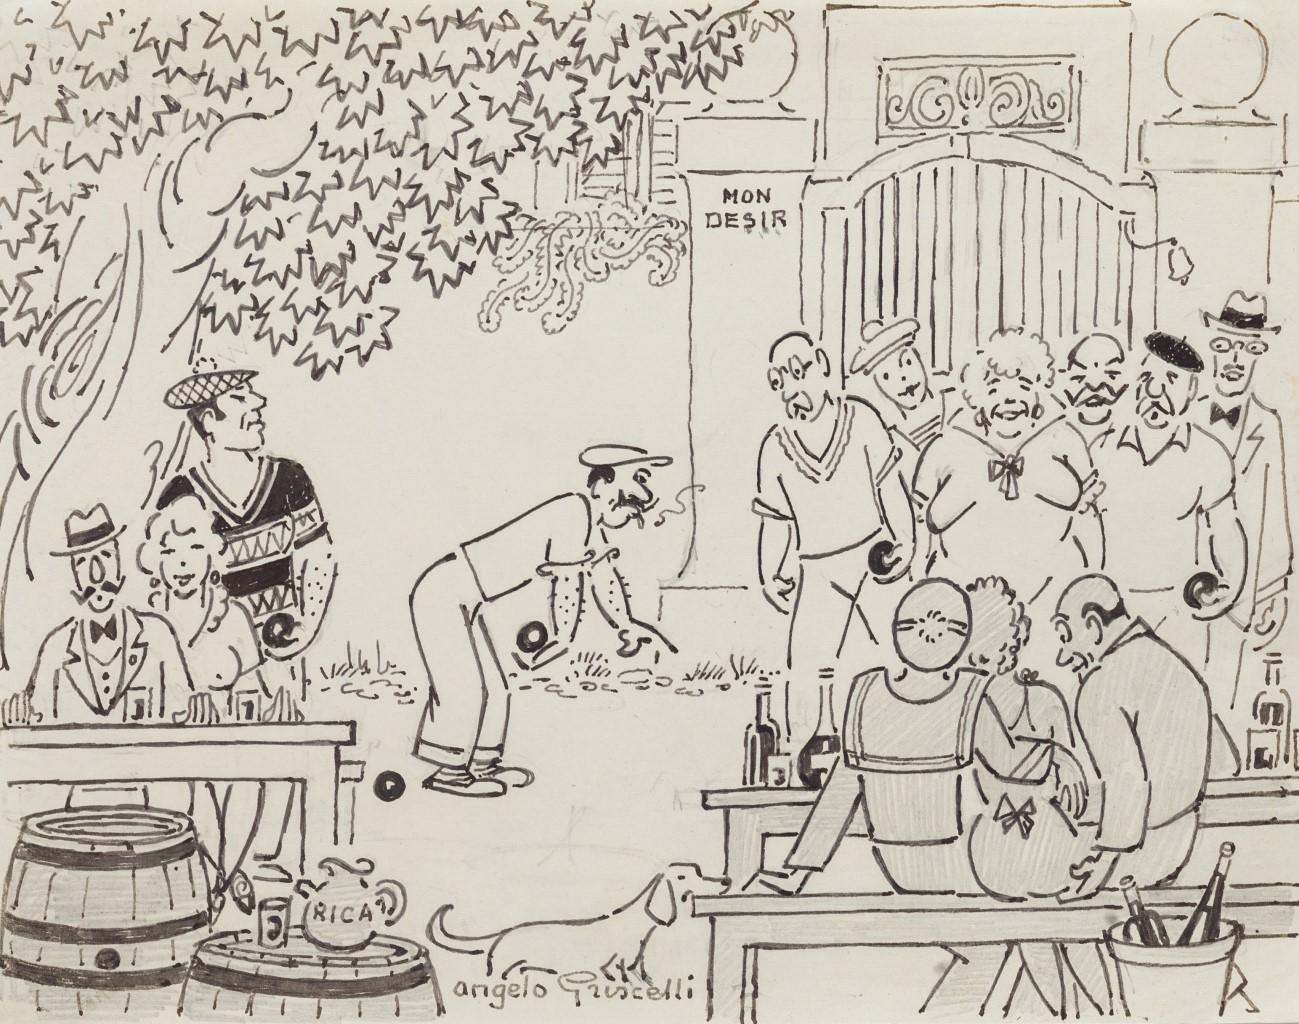 Players of Bocce is an original drawing in pencil China Ink on paper realized by Angelo Griscelli (1893 - 1970)

The state of preservation is good and aged.

Hand-signed on the lower center.

The artwork represents figures playing together.

The